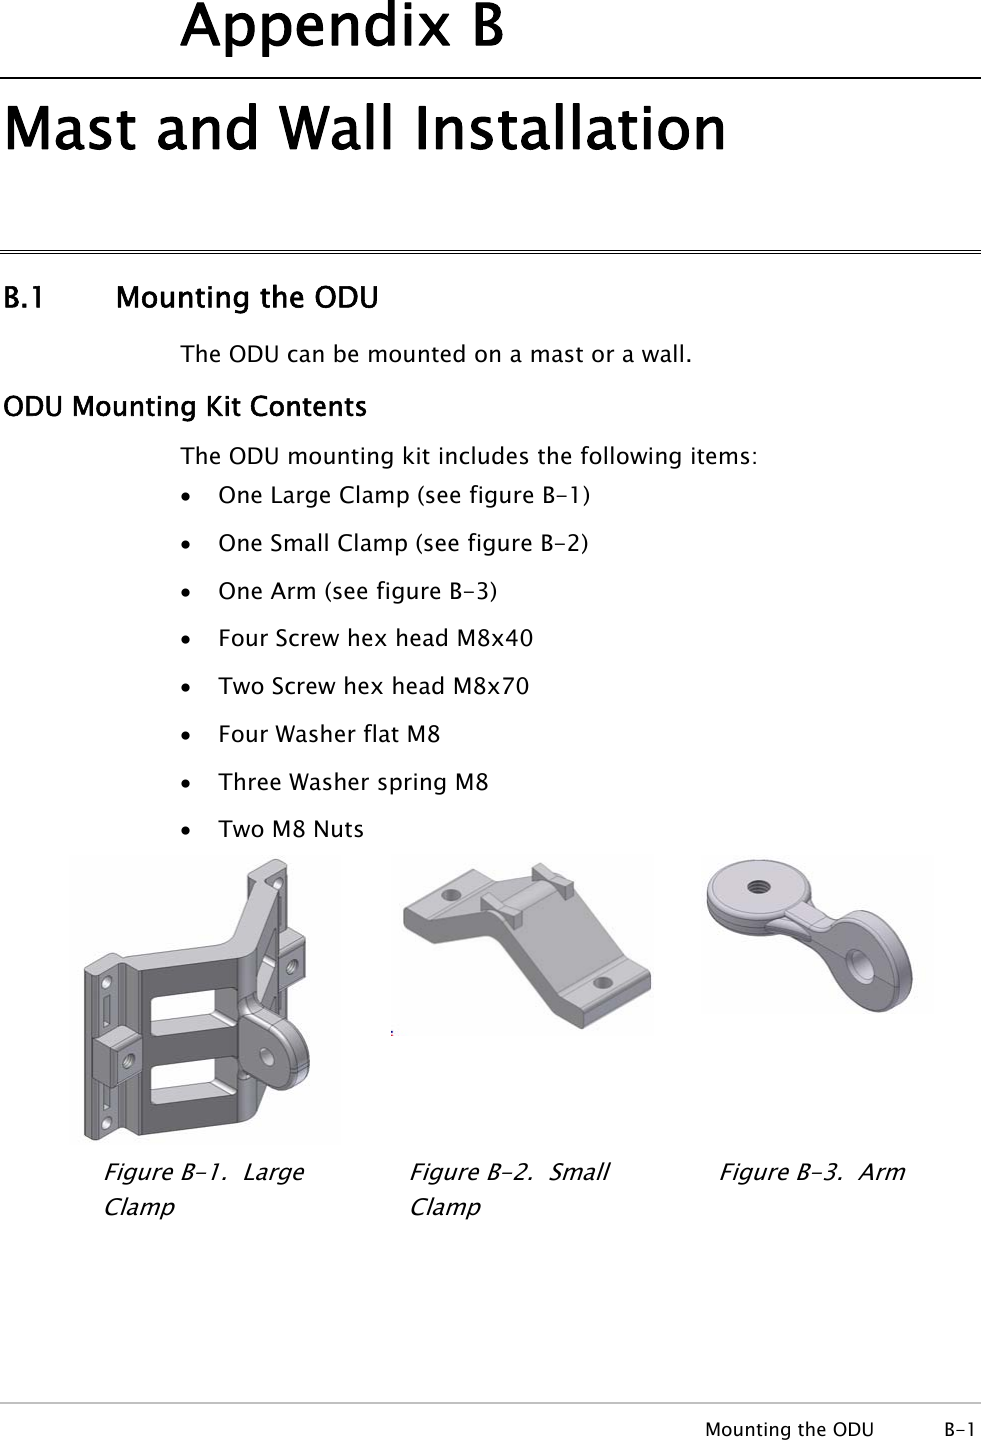 Appendix B Mast and Wall Installation B.1 Mounting the ODU The ODU can be mounted on a mast or a wall. ODU Mounting Kit Contents The ODU mounting kit includes the following items: • One Large Clamp (see figure B-1) • One Small Clamp (see figure B-2) • One Arm (see figure B-3) • Four Screw hex head M8x40 • Two Screw hex head M8x70 • Four Washer flat M8 • Three Washer spring M8 • Two M8 Nuts  Figure B-1.  Large Clamp Figure B-2.  Small Clamp Figure B-3.  Arm  Mounting the ODU  B-1 